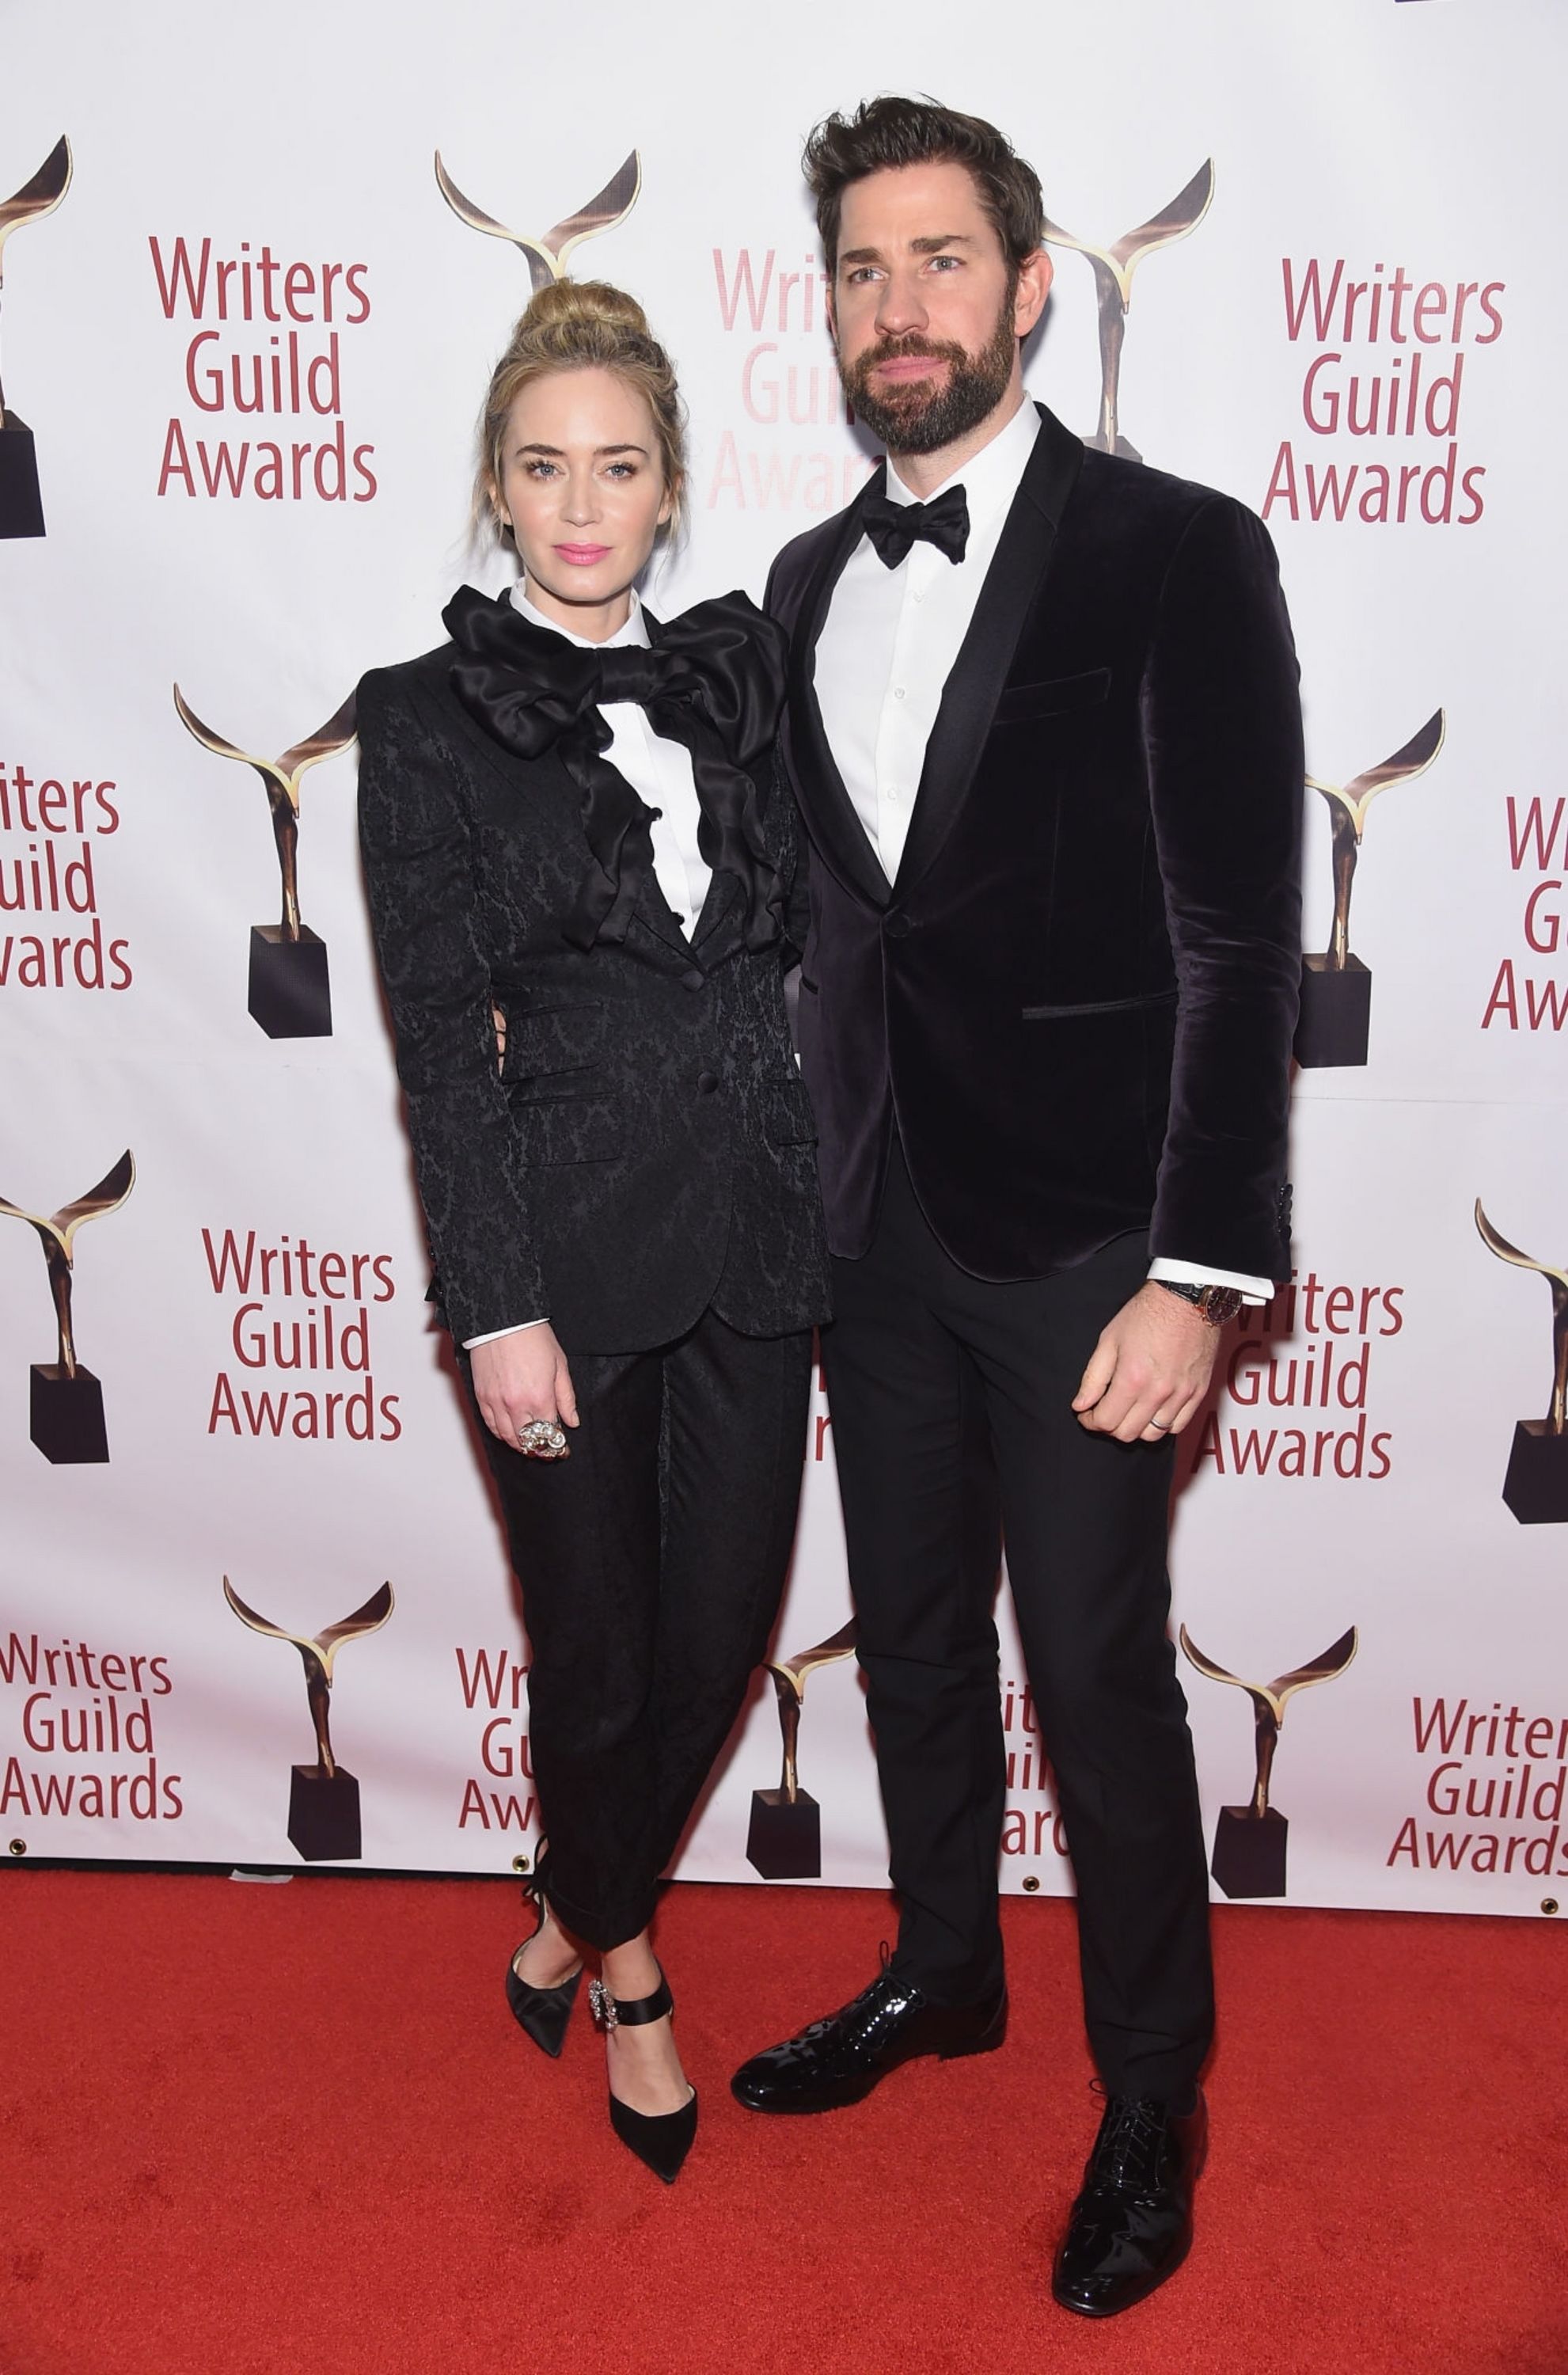 2019-02-17-71st-Annual-Writers-Guild-Awards-016.jpg